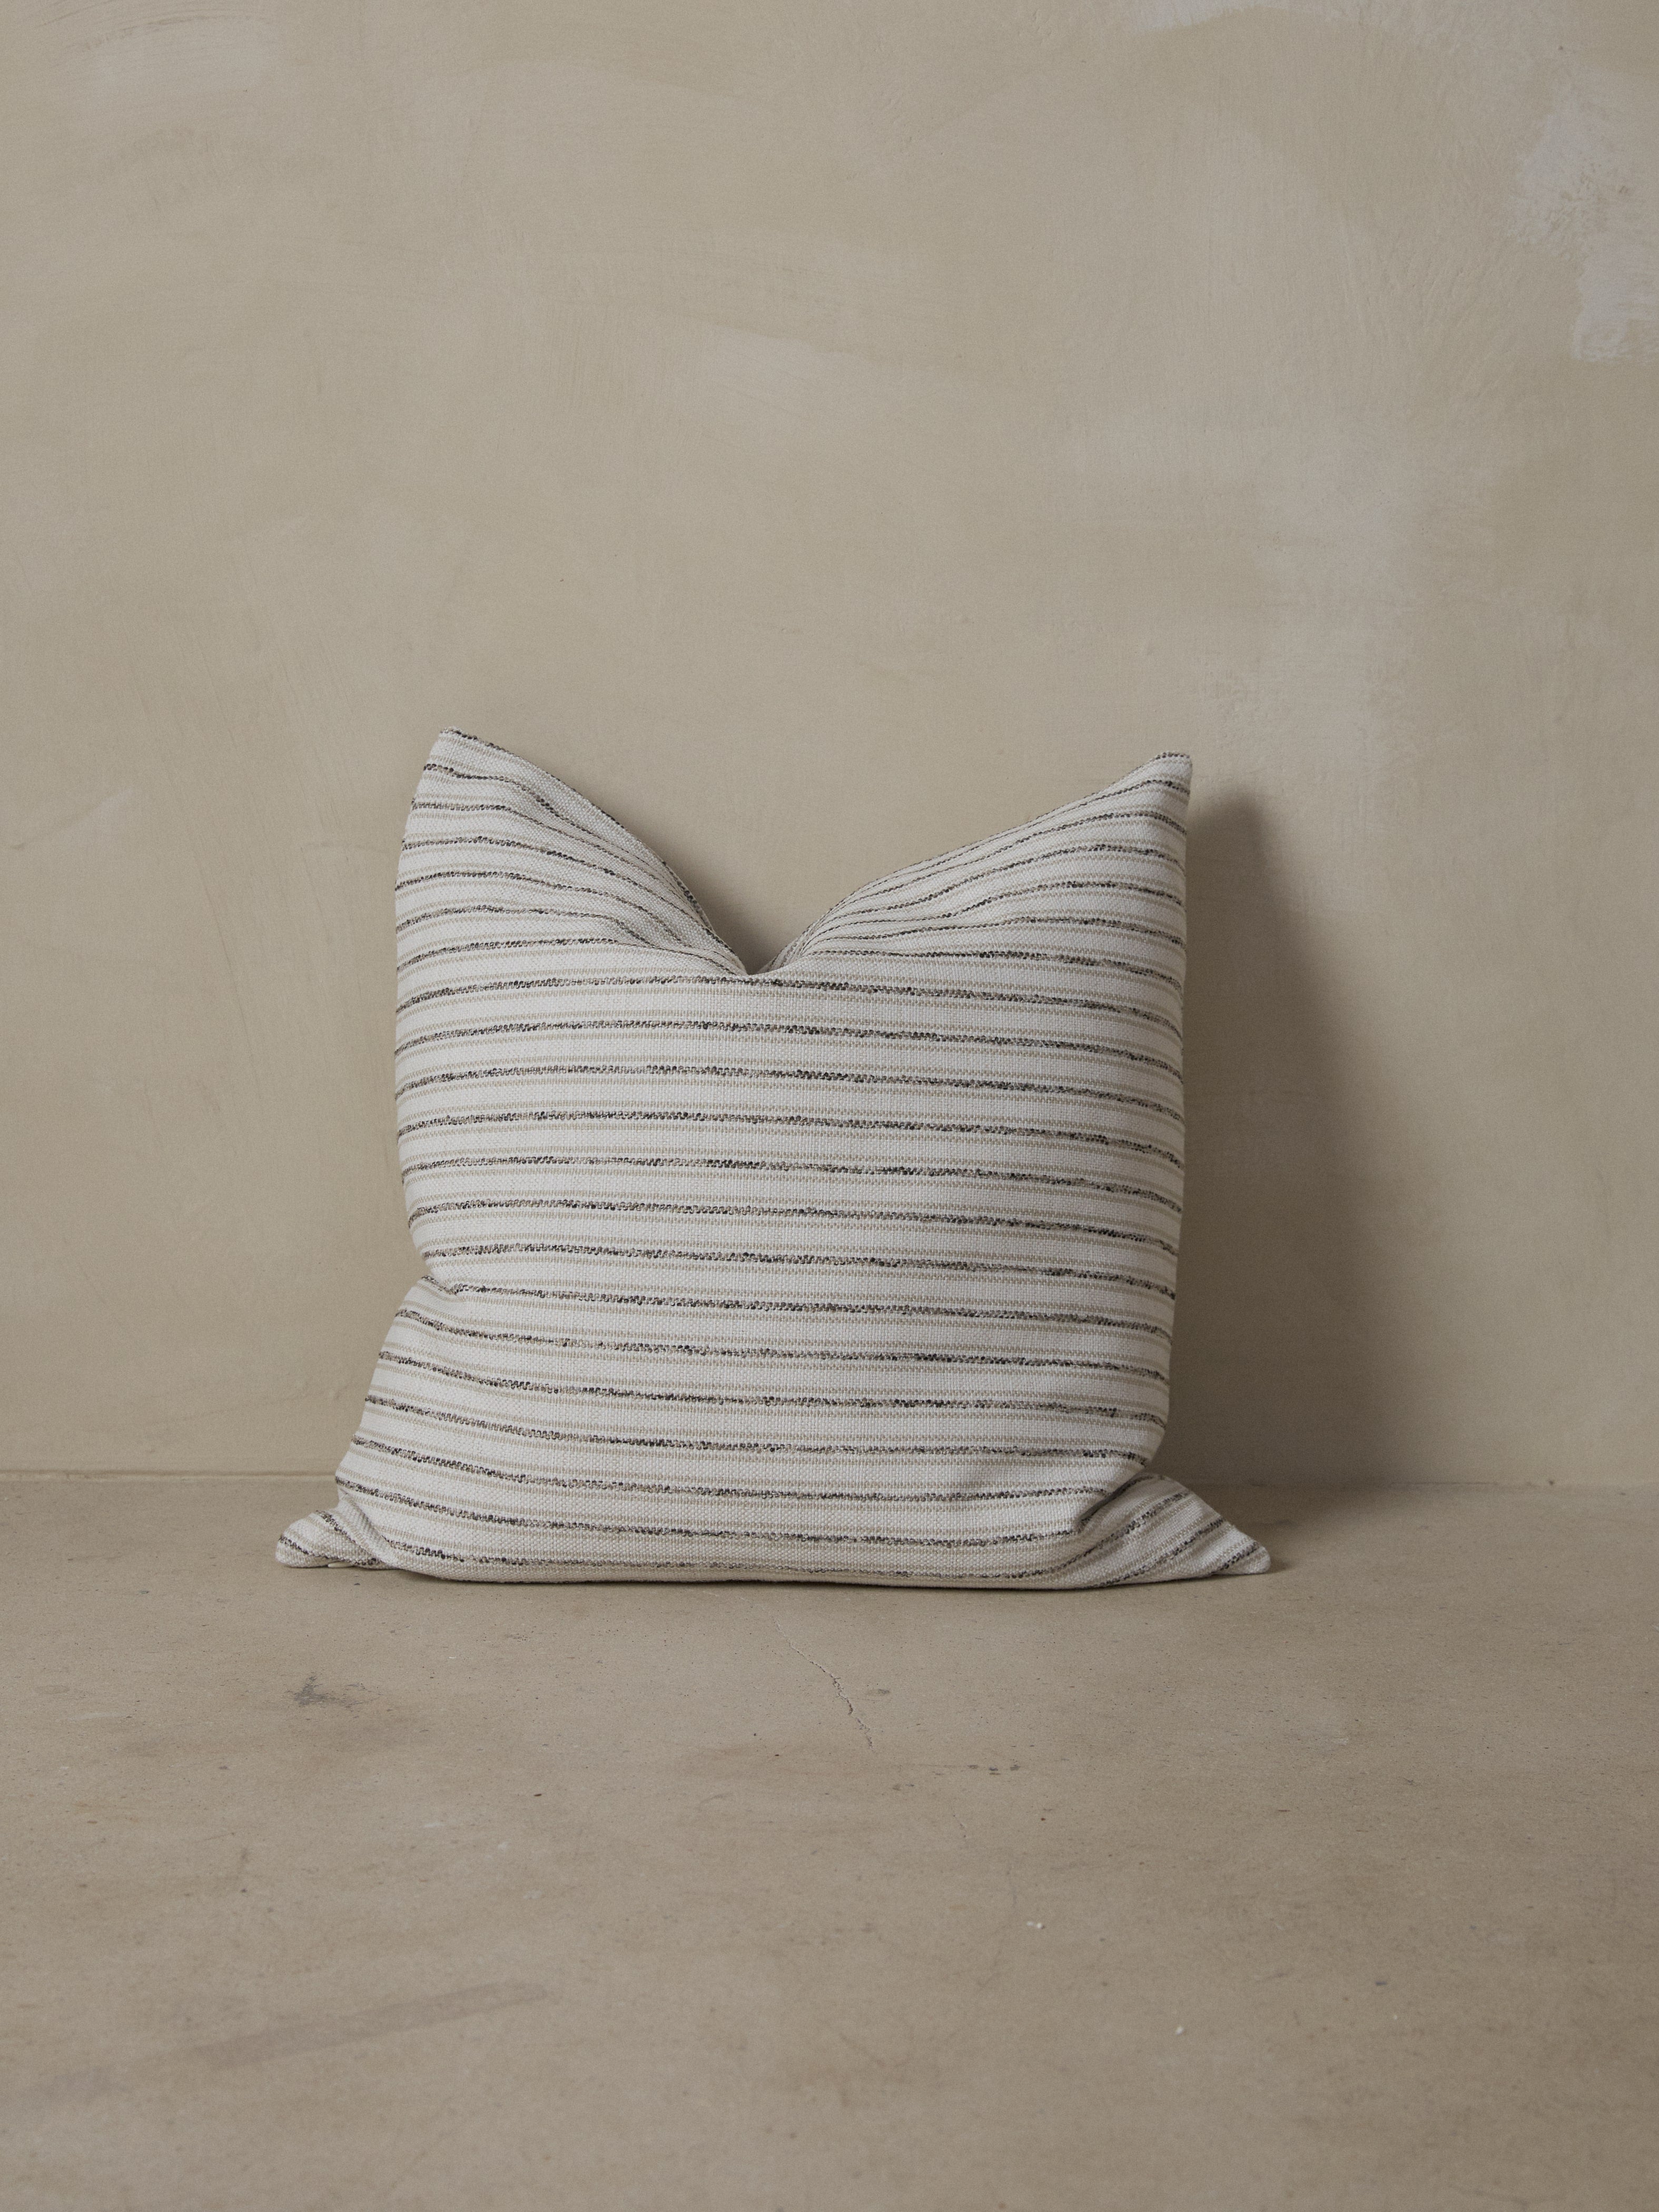 Striped double-sided decorative throw pillow in woven cream, black and natural stripes with off white backing. 